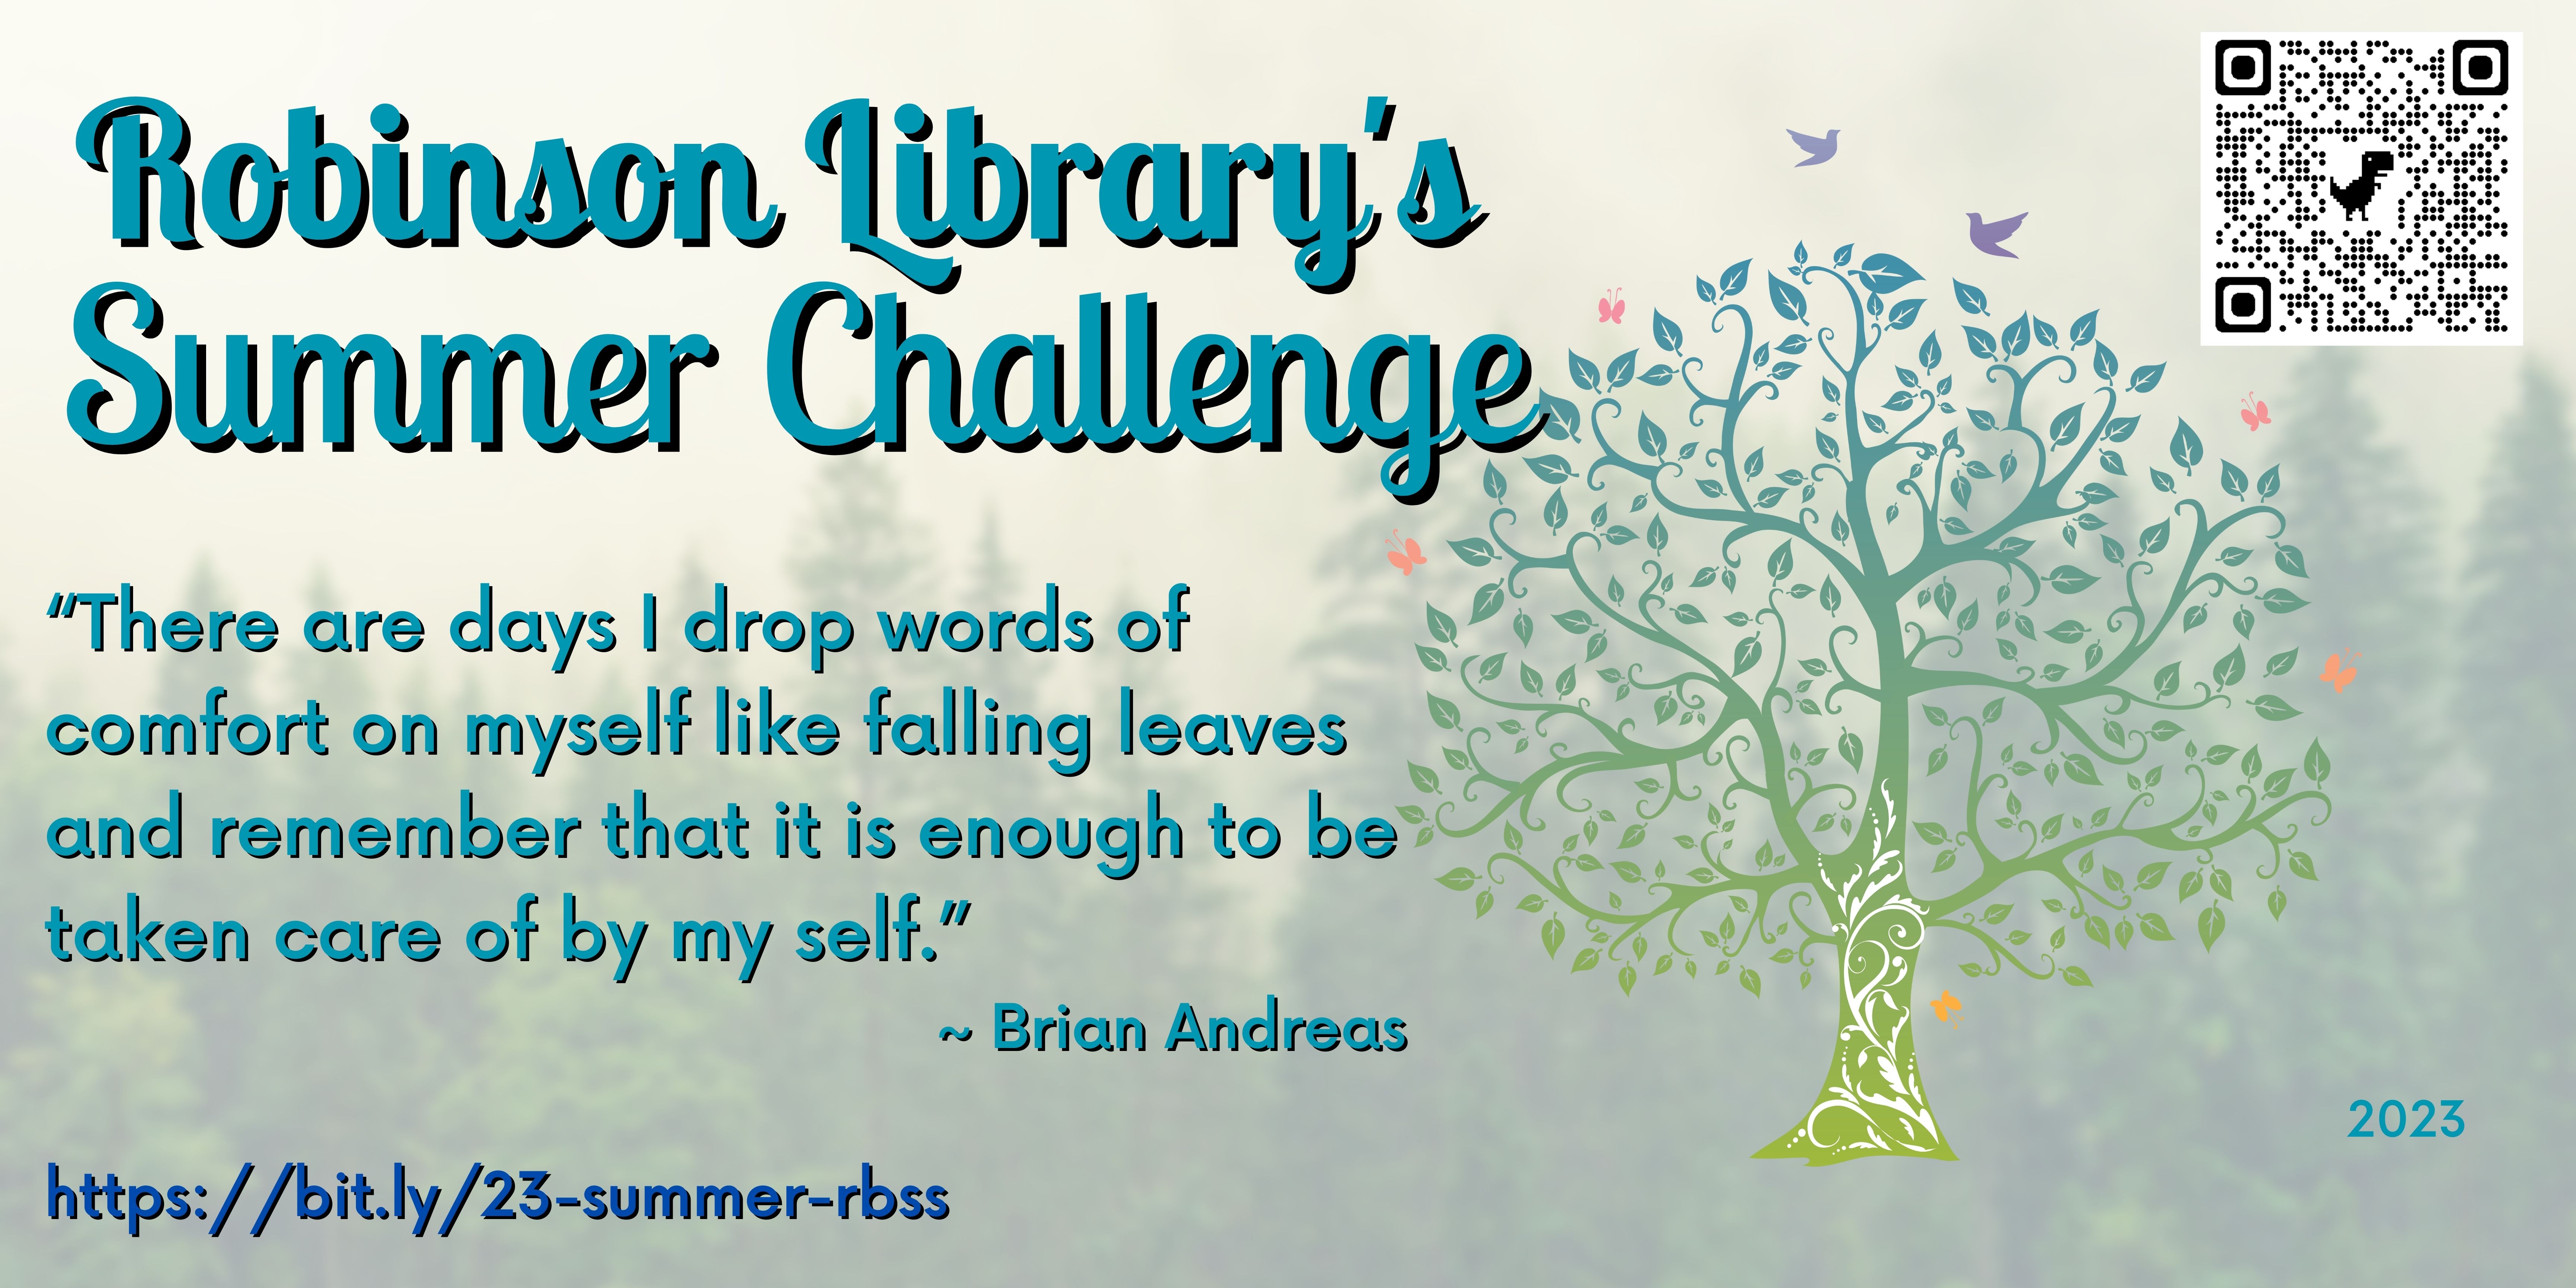 Robinson Library's Summer Challenge. Quote - "There are days I drop words of comfort on myself like falling leaves and remember that it is enough to be taken care of by my self." -Brian Andreas